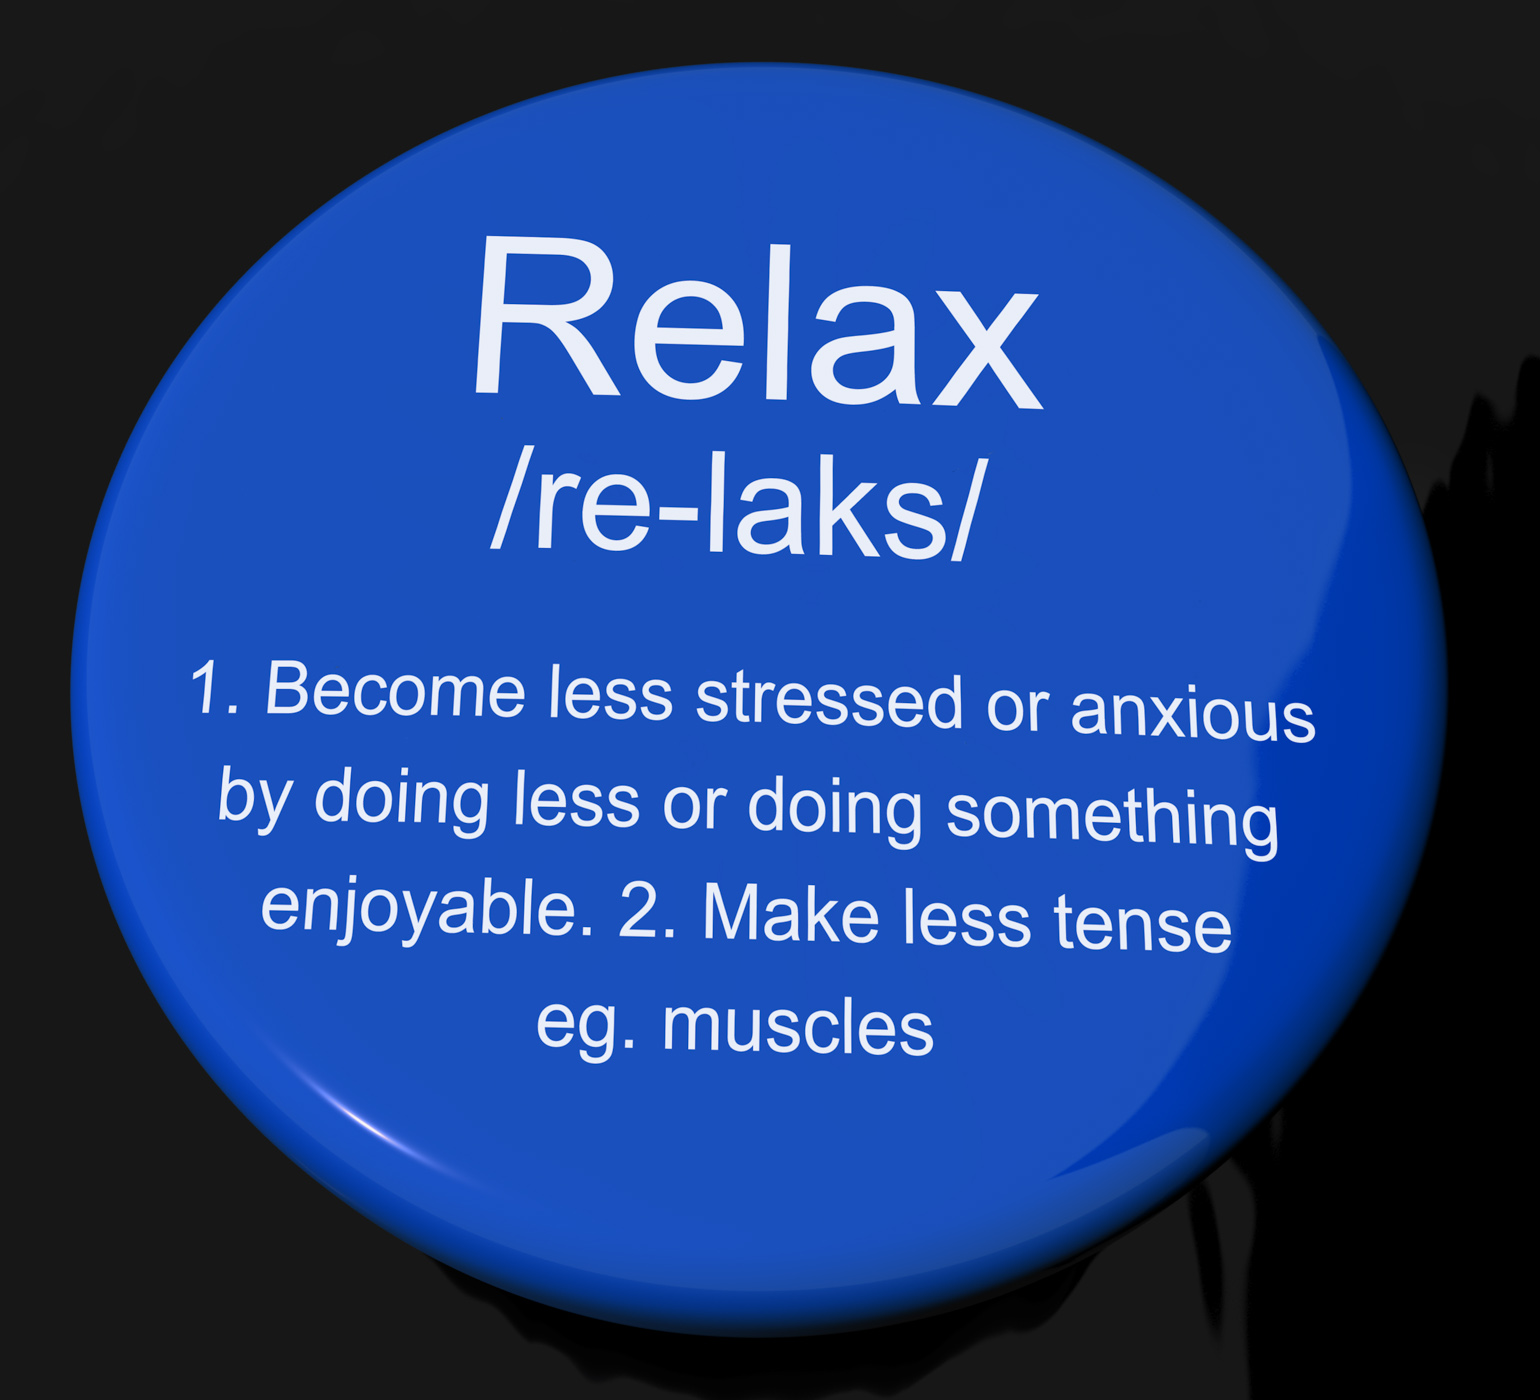 Relax definition button showing less stress and tense photo